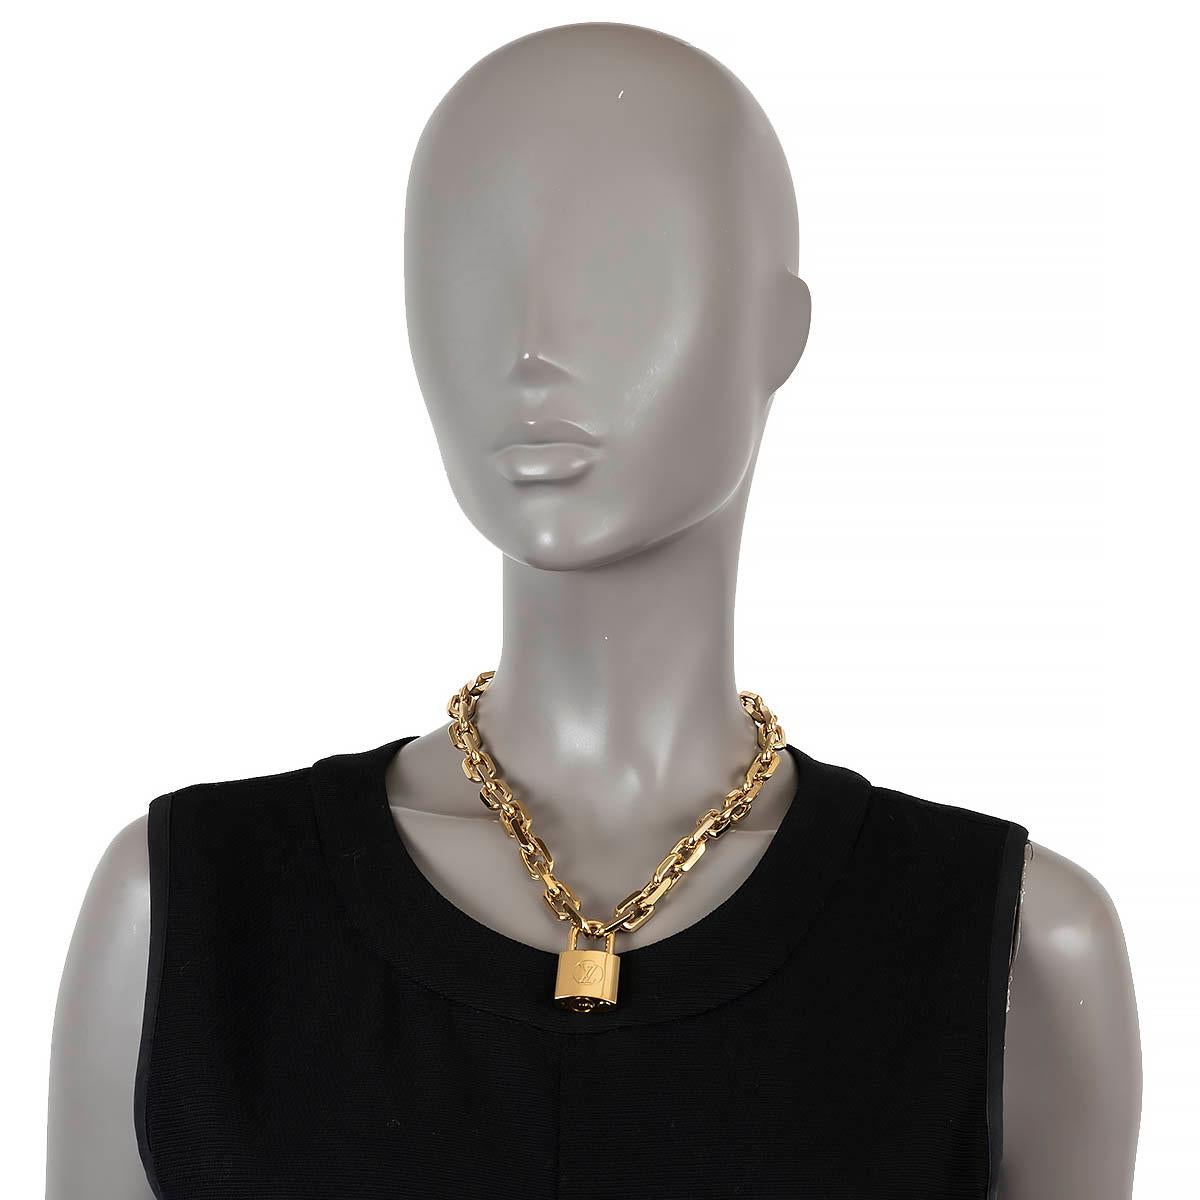 100% authentic Louis Vuitton Edge Cadenas necklace in gold-tone metal features a large padlock pendant meticulously engraved with the LV initials, suspended from a thick link chain. The pendant is opened and closed by pushing the lock. Has been worn